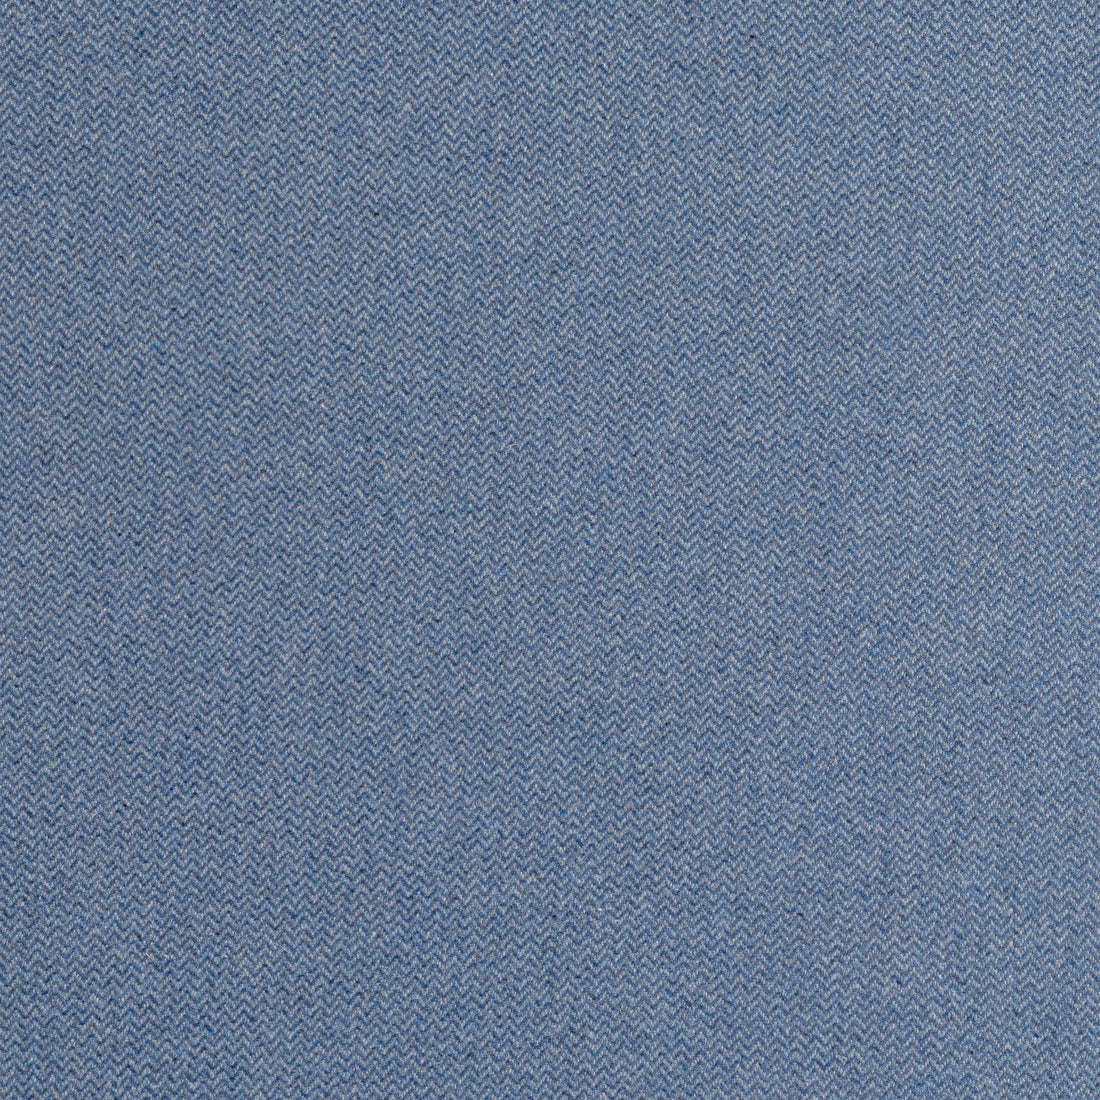 Dorset fabric in french blue color - pattern number W80913 - by Thibaut in the Dunmore collection